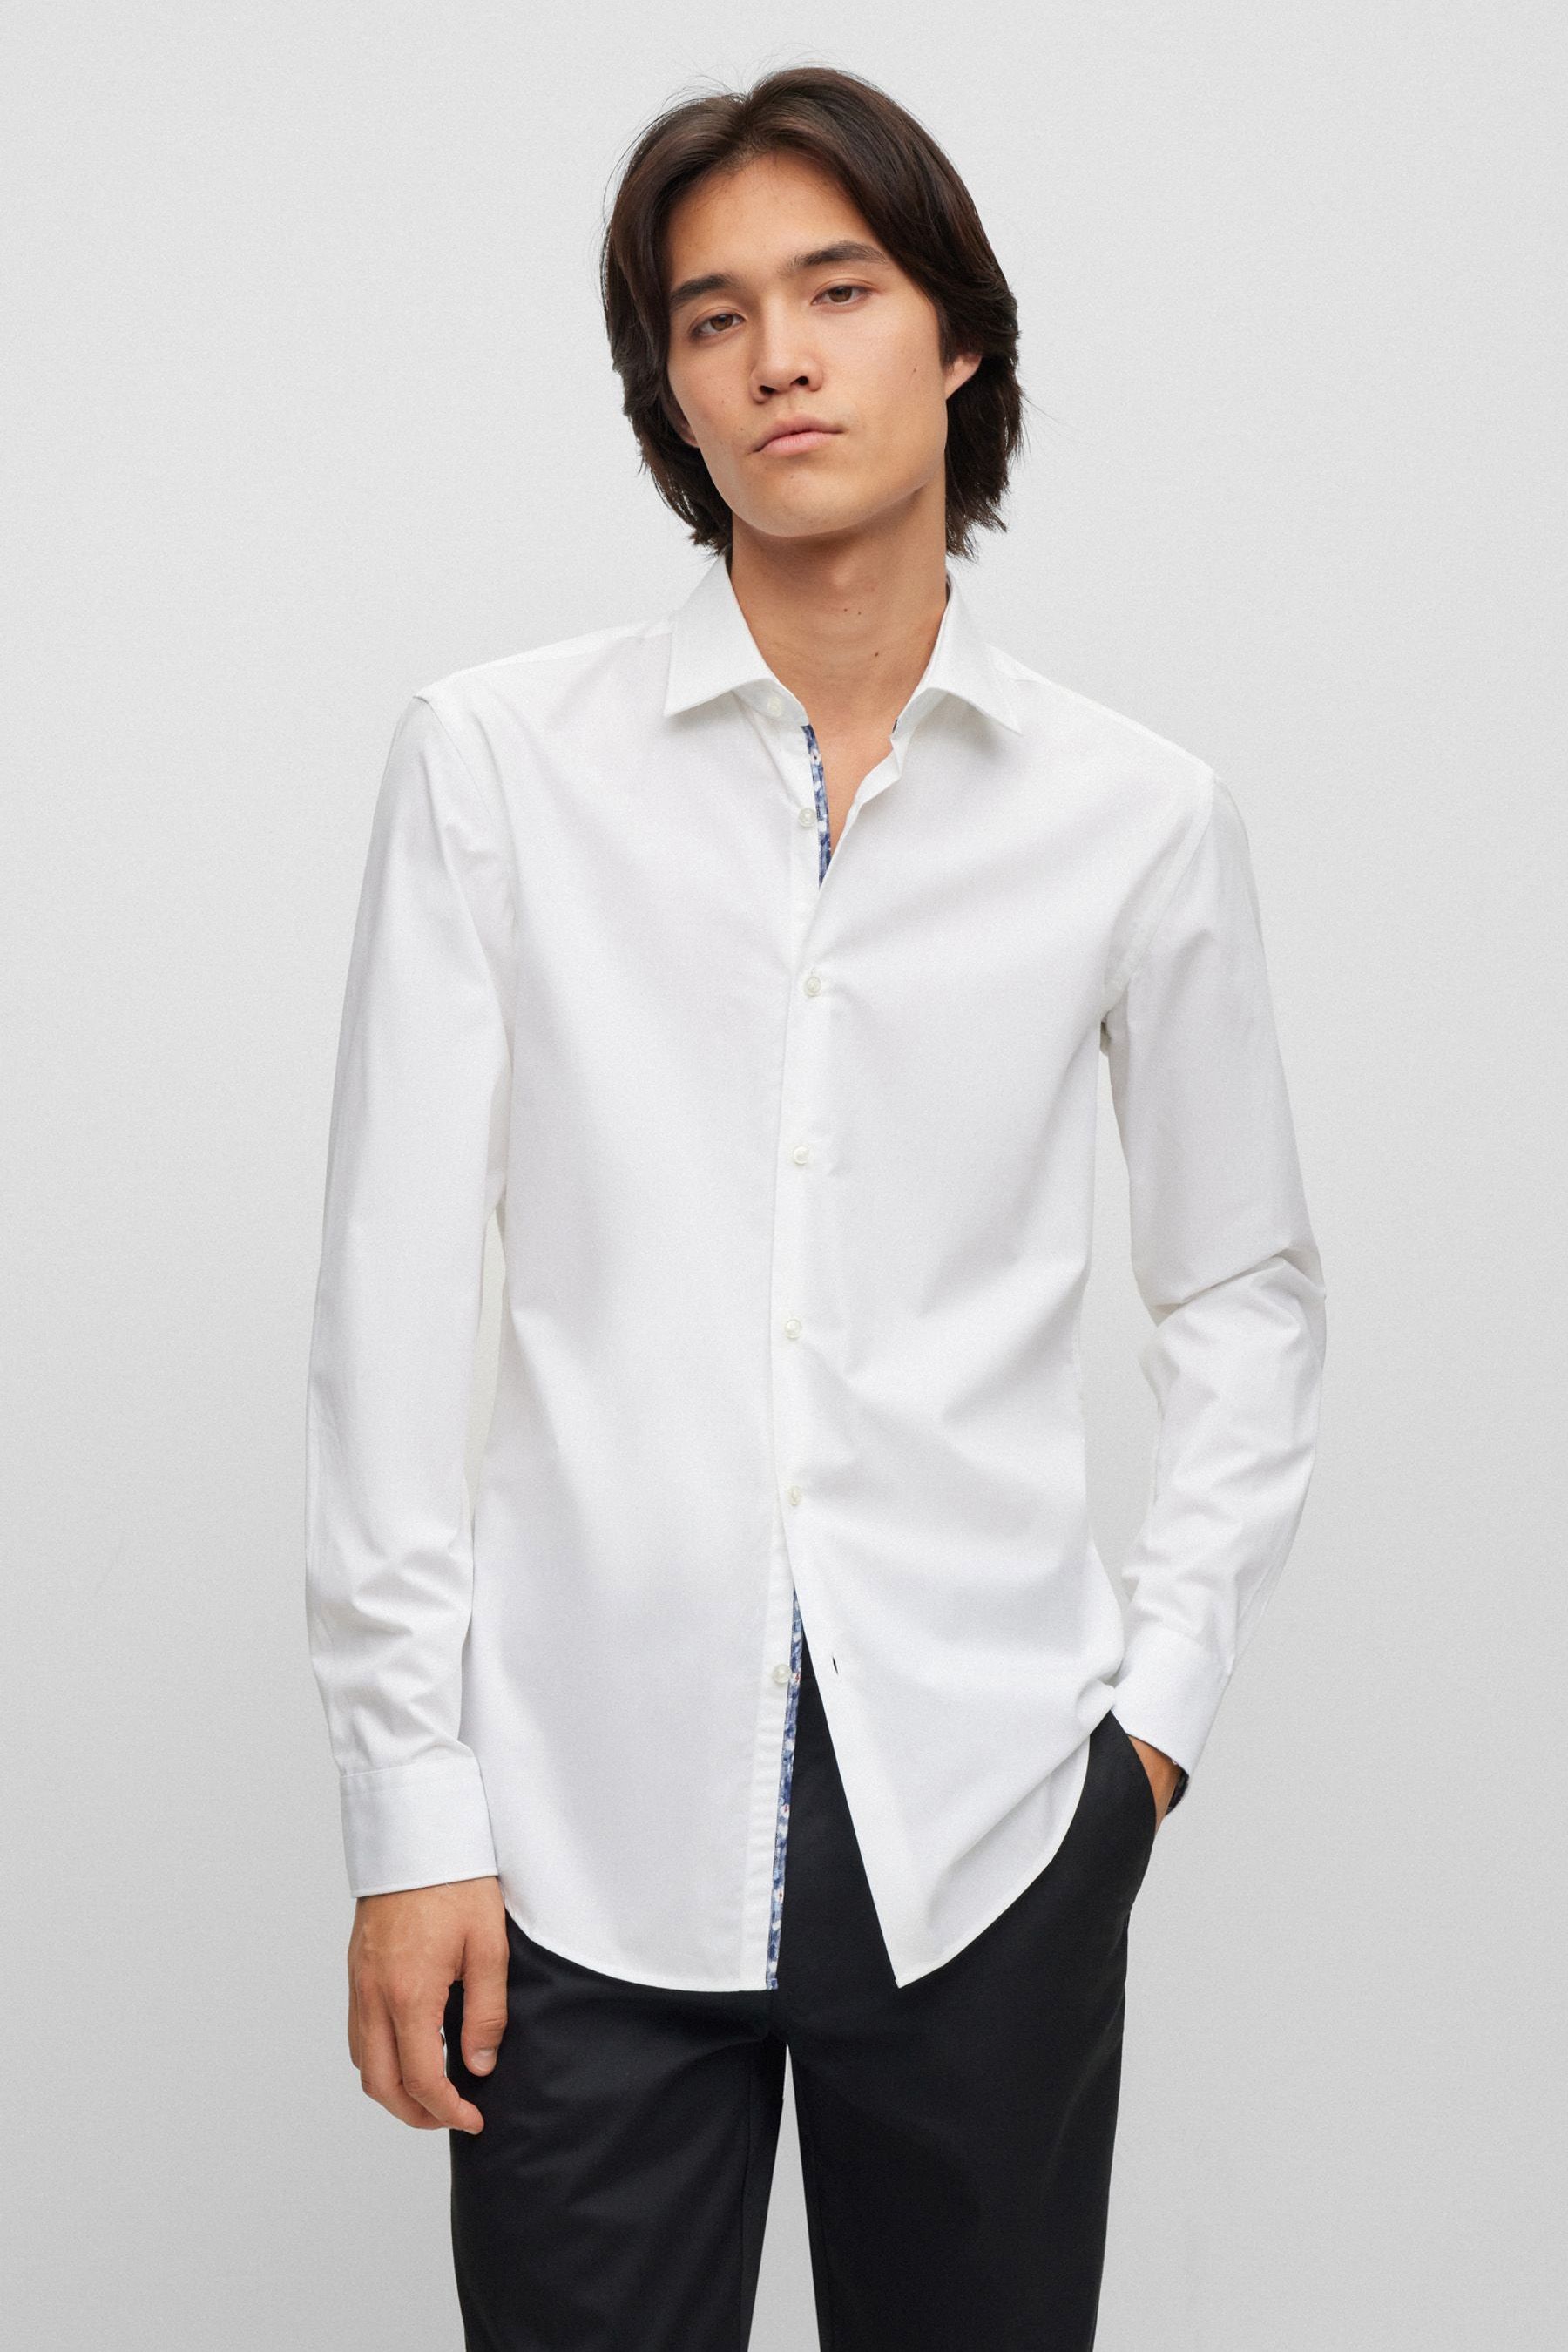 Buy HUGO White Slim Fit Long Sleeve Shirt from the Next UK online shop